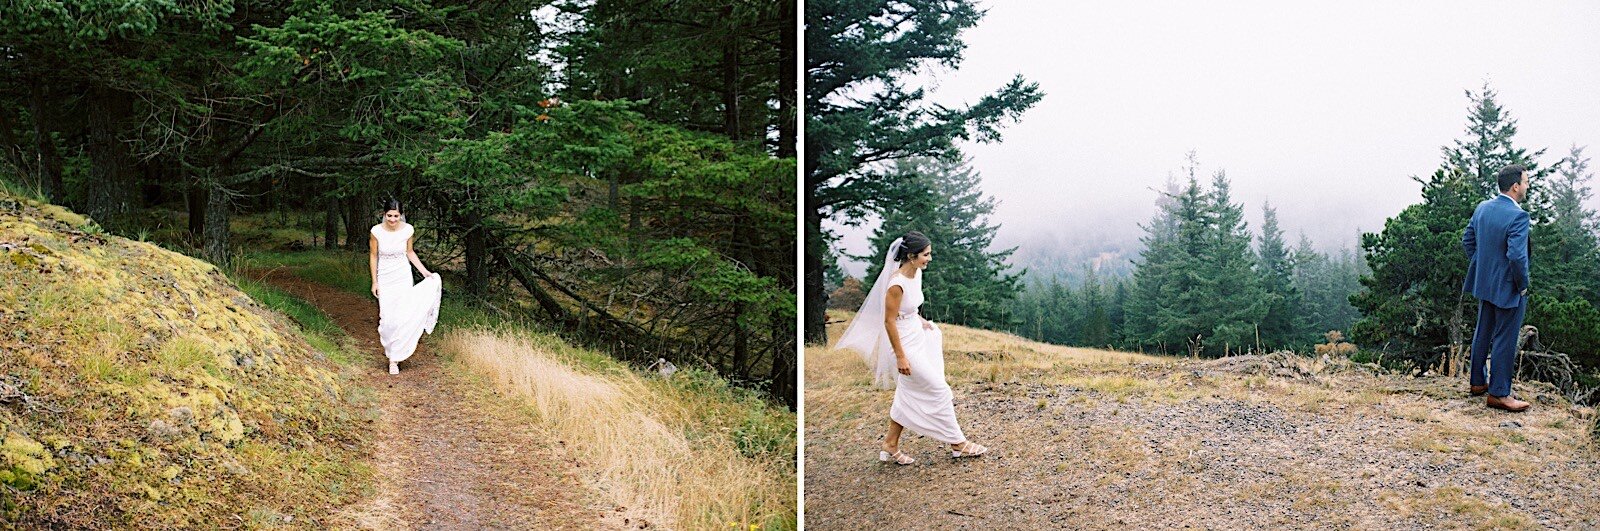 015_Island_Resort_photographer_seattle_Rosario_Wedding_by_at_Orcas_Outdoor_best_documentary.jpg